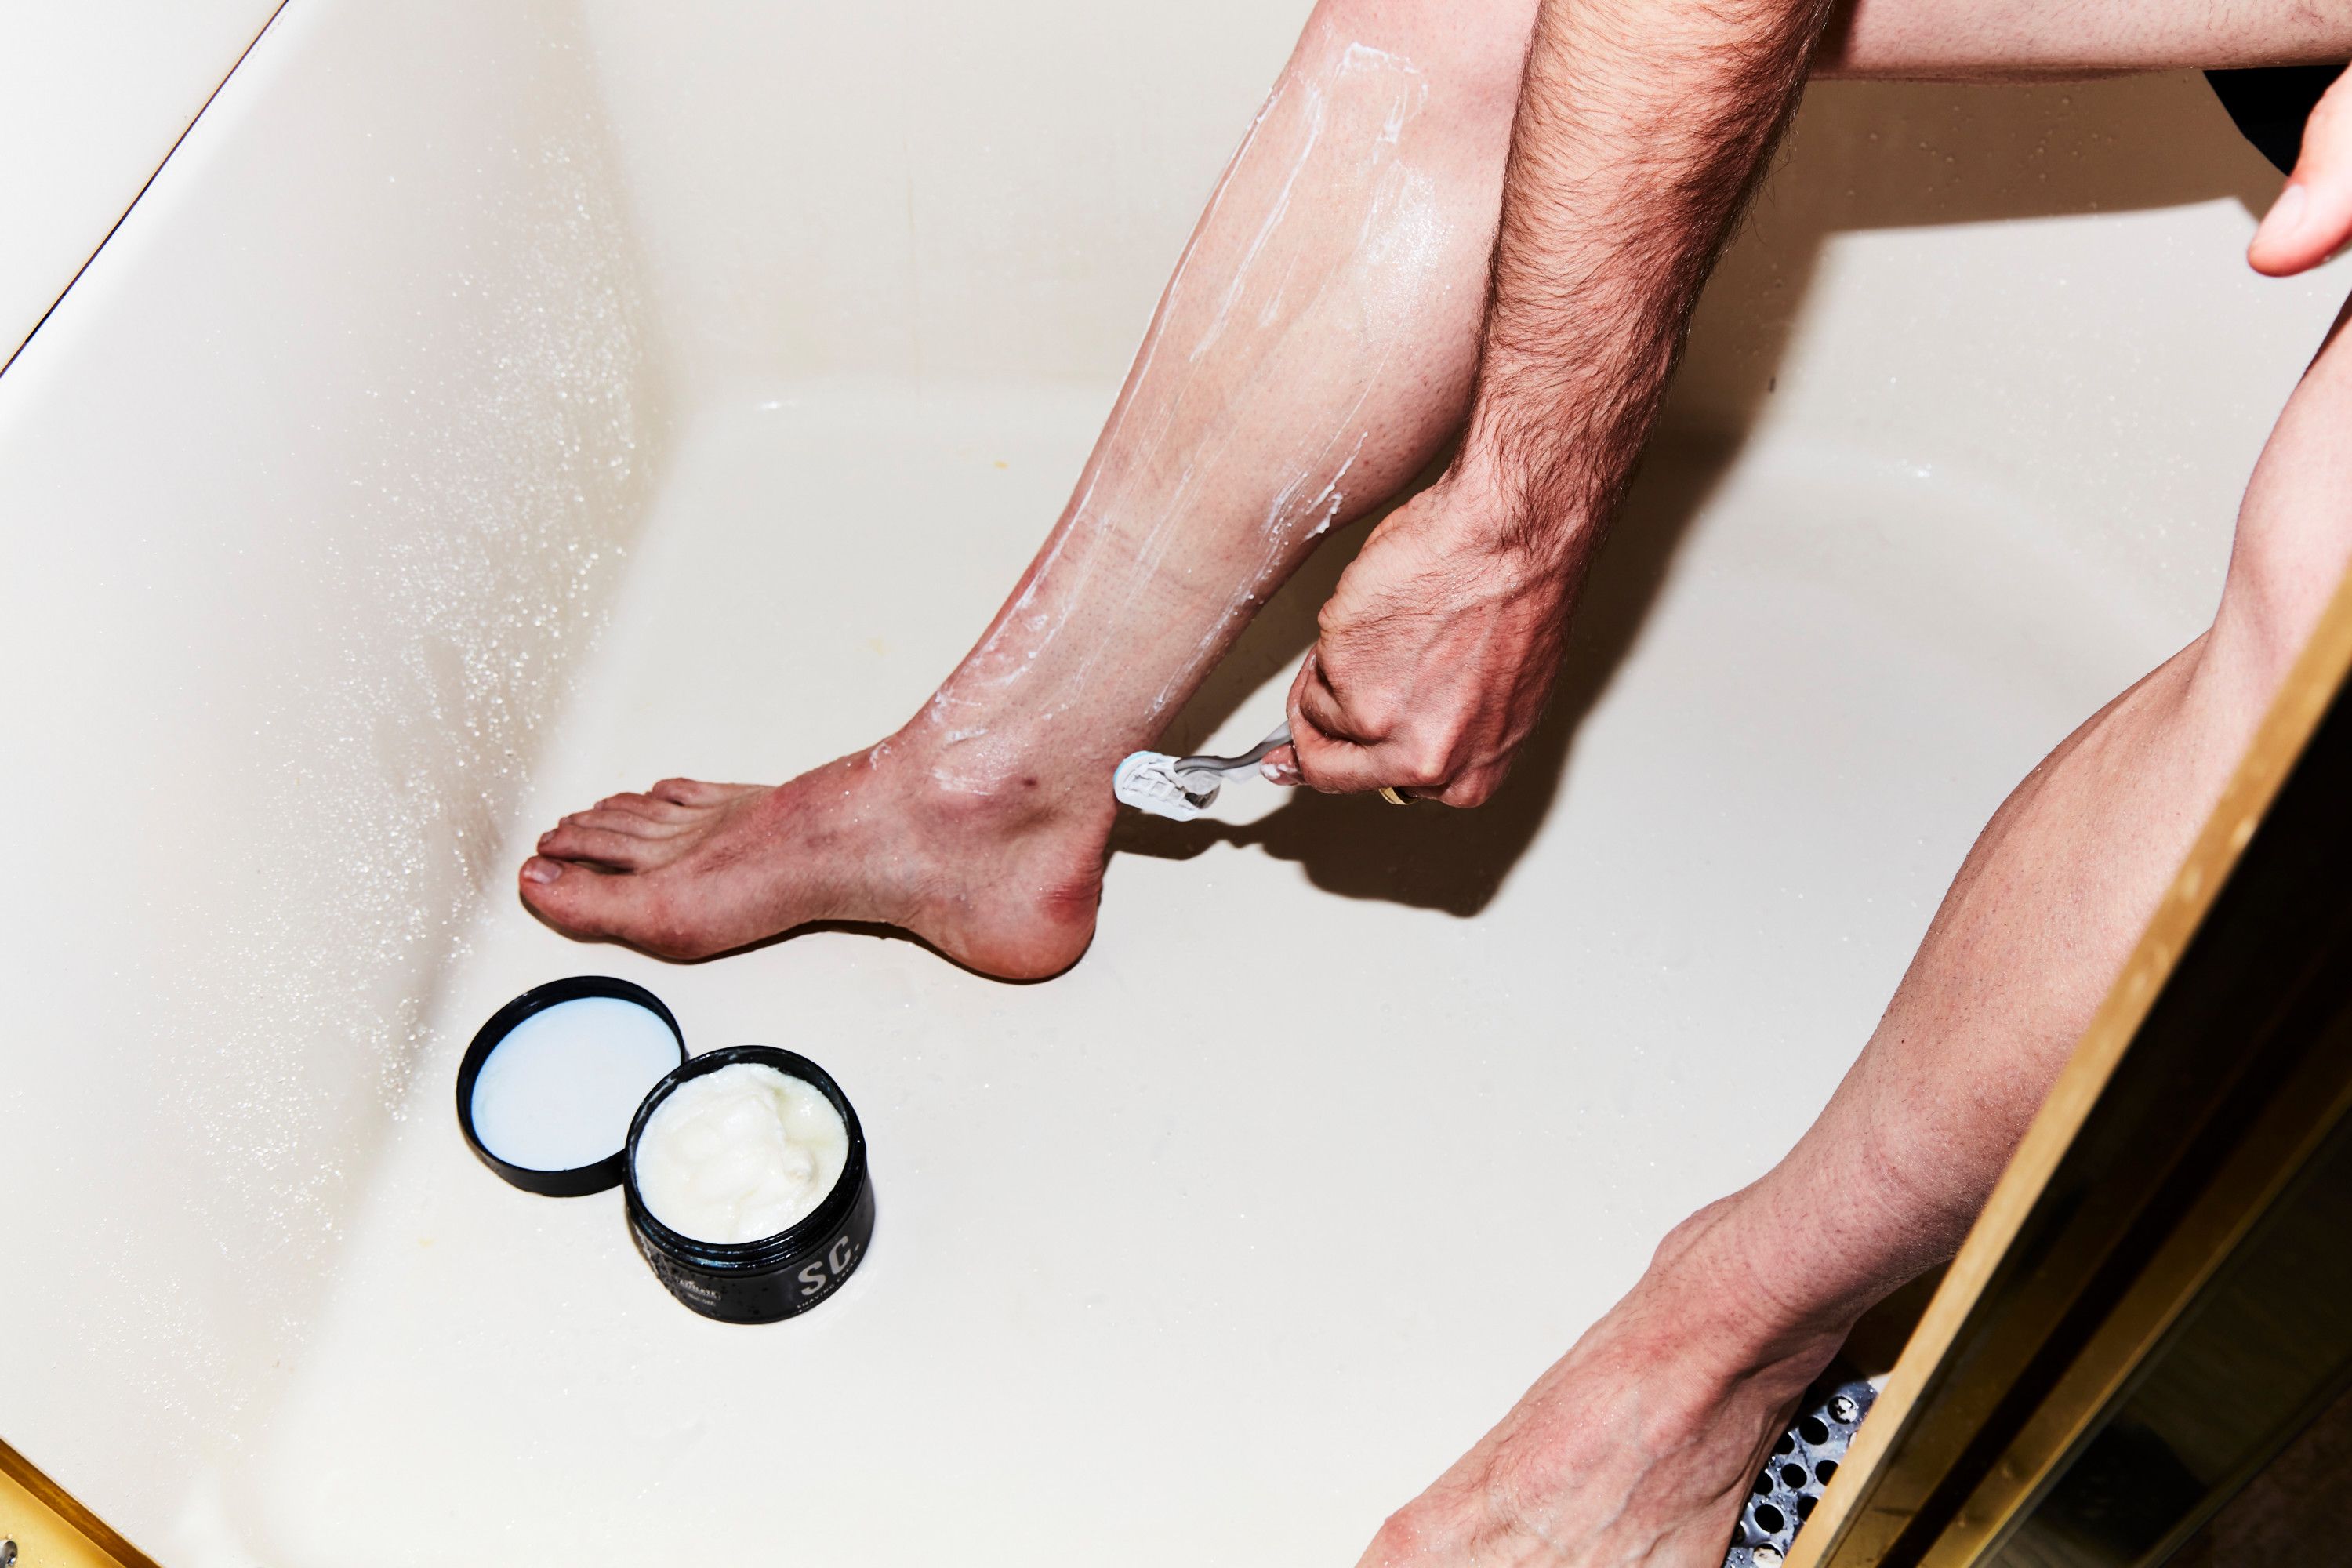 How to Shave Your Legs Why Do Cyclists Shave Their Legs? 